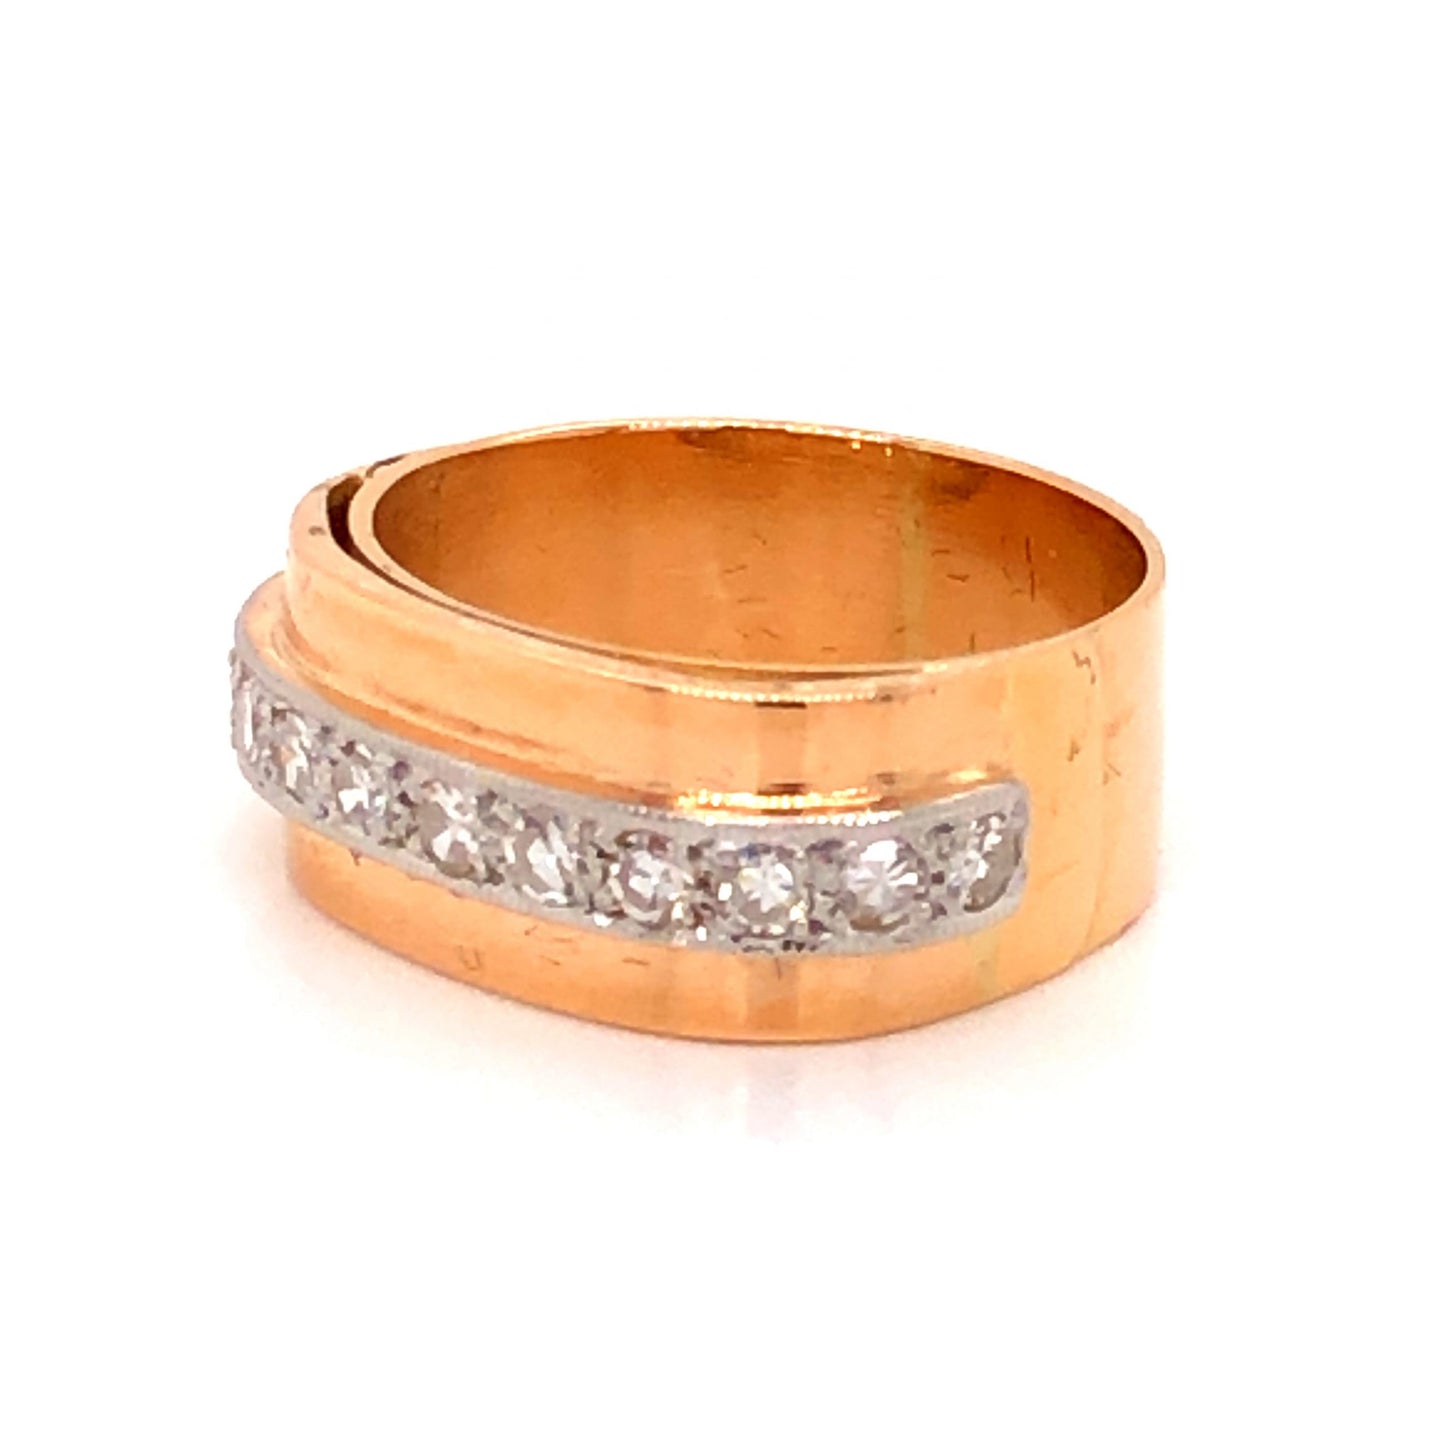 Retro Two-Tone Diamond Cocktail Ring in 18k Rose Gold